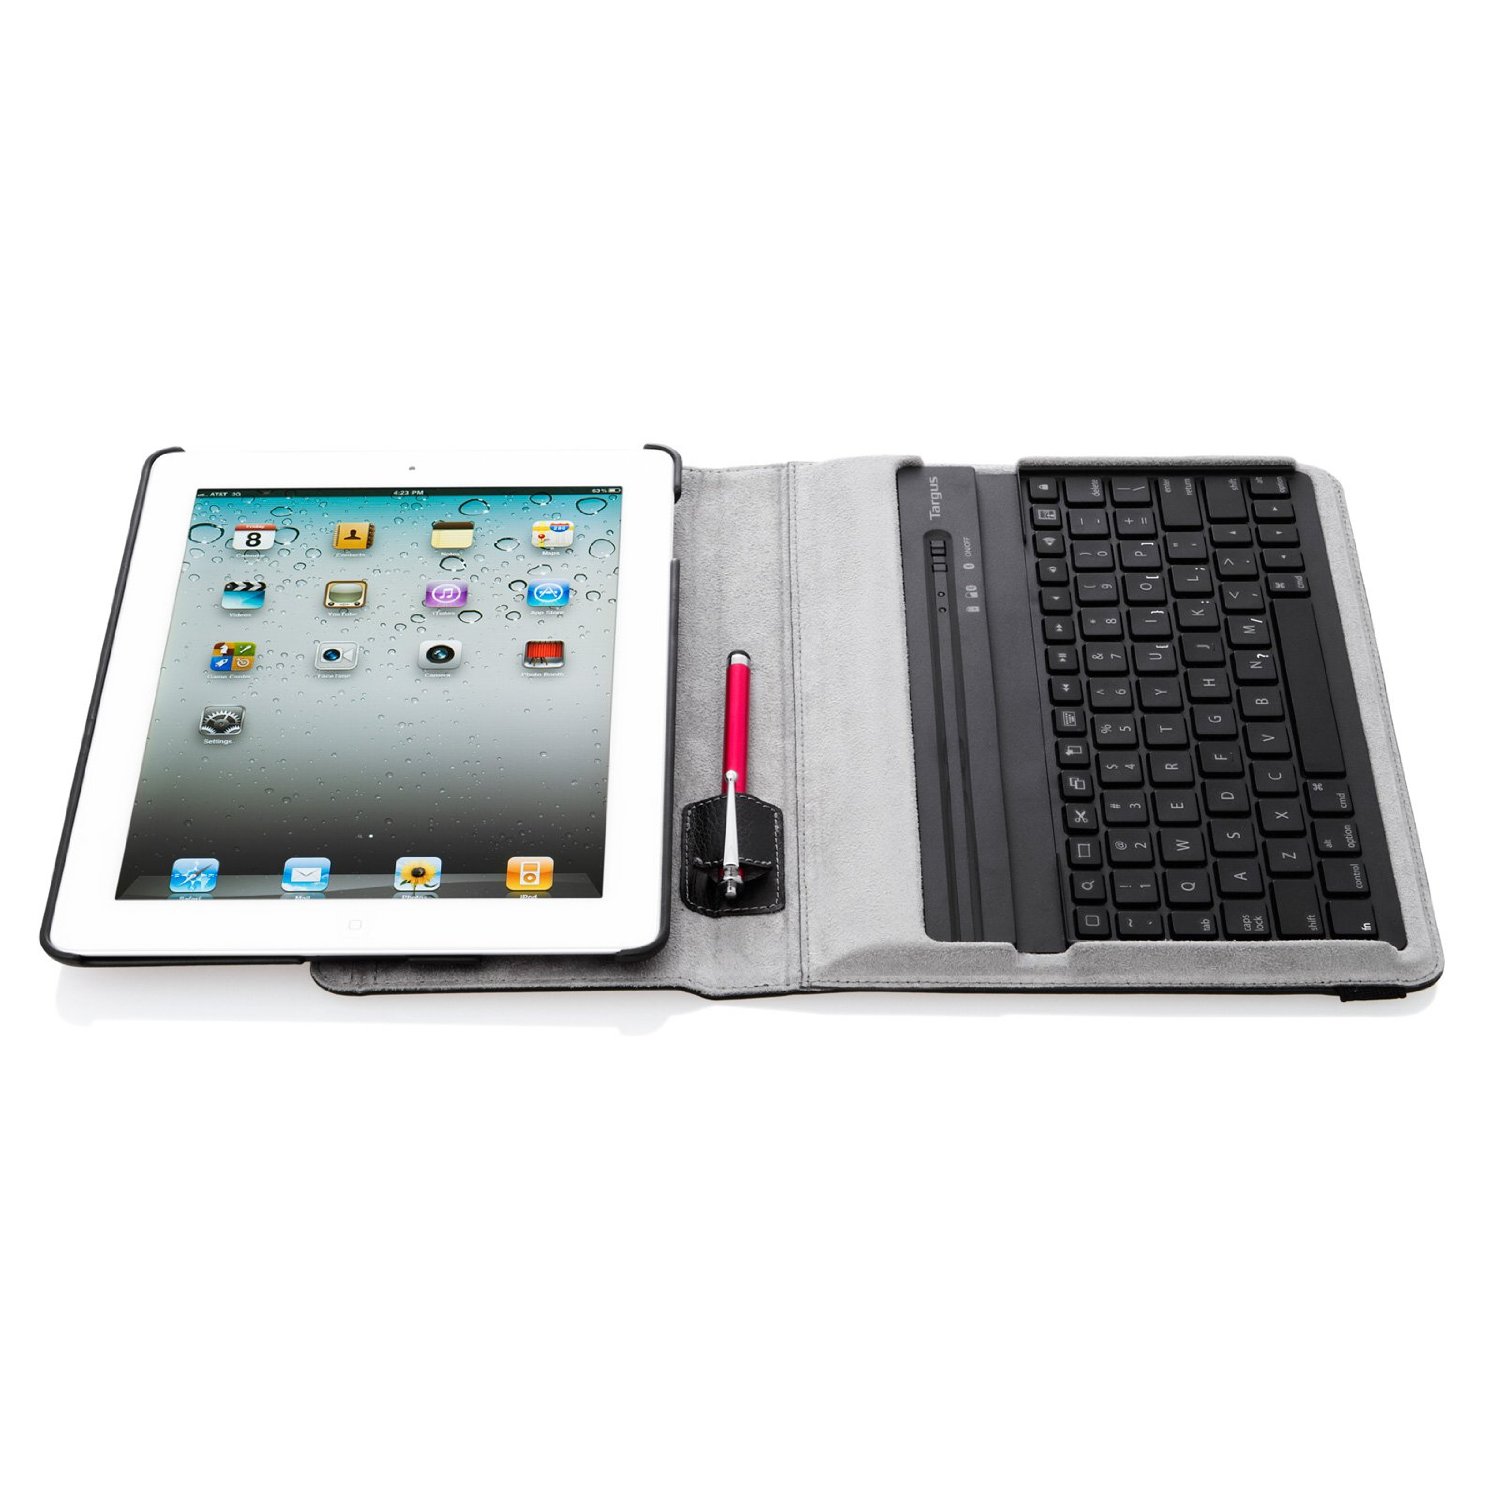 http://thetechjournal.com/wp-content/uploads/images/1108/1312709193-targus-versavu-case-and-keyboard-for-ipad-2-2.jpg